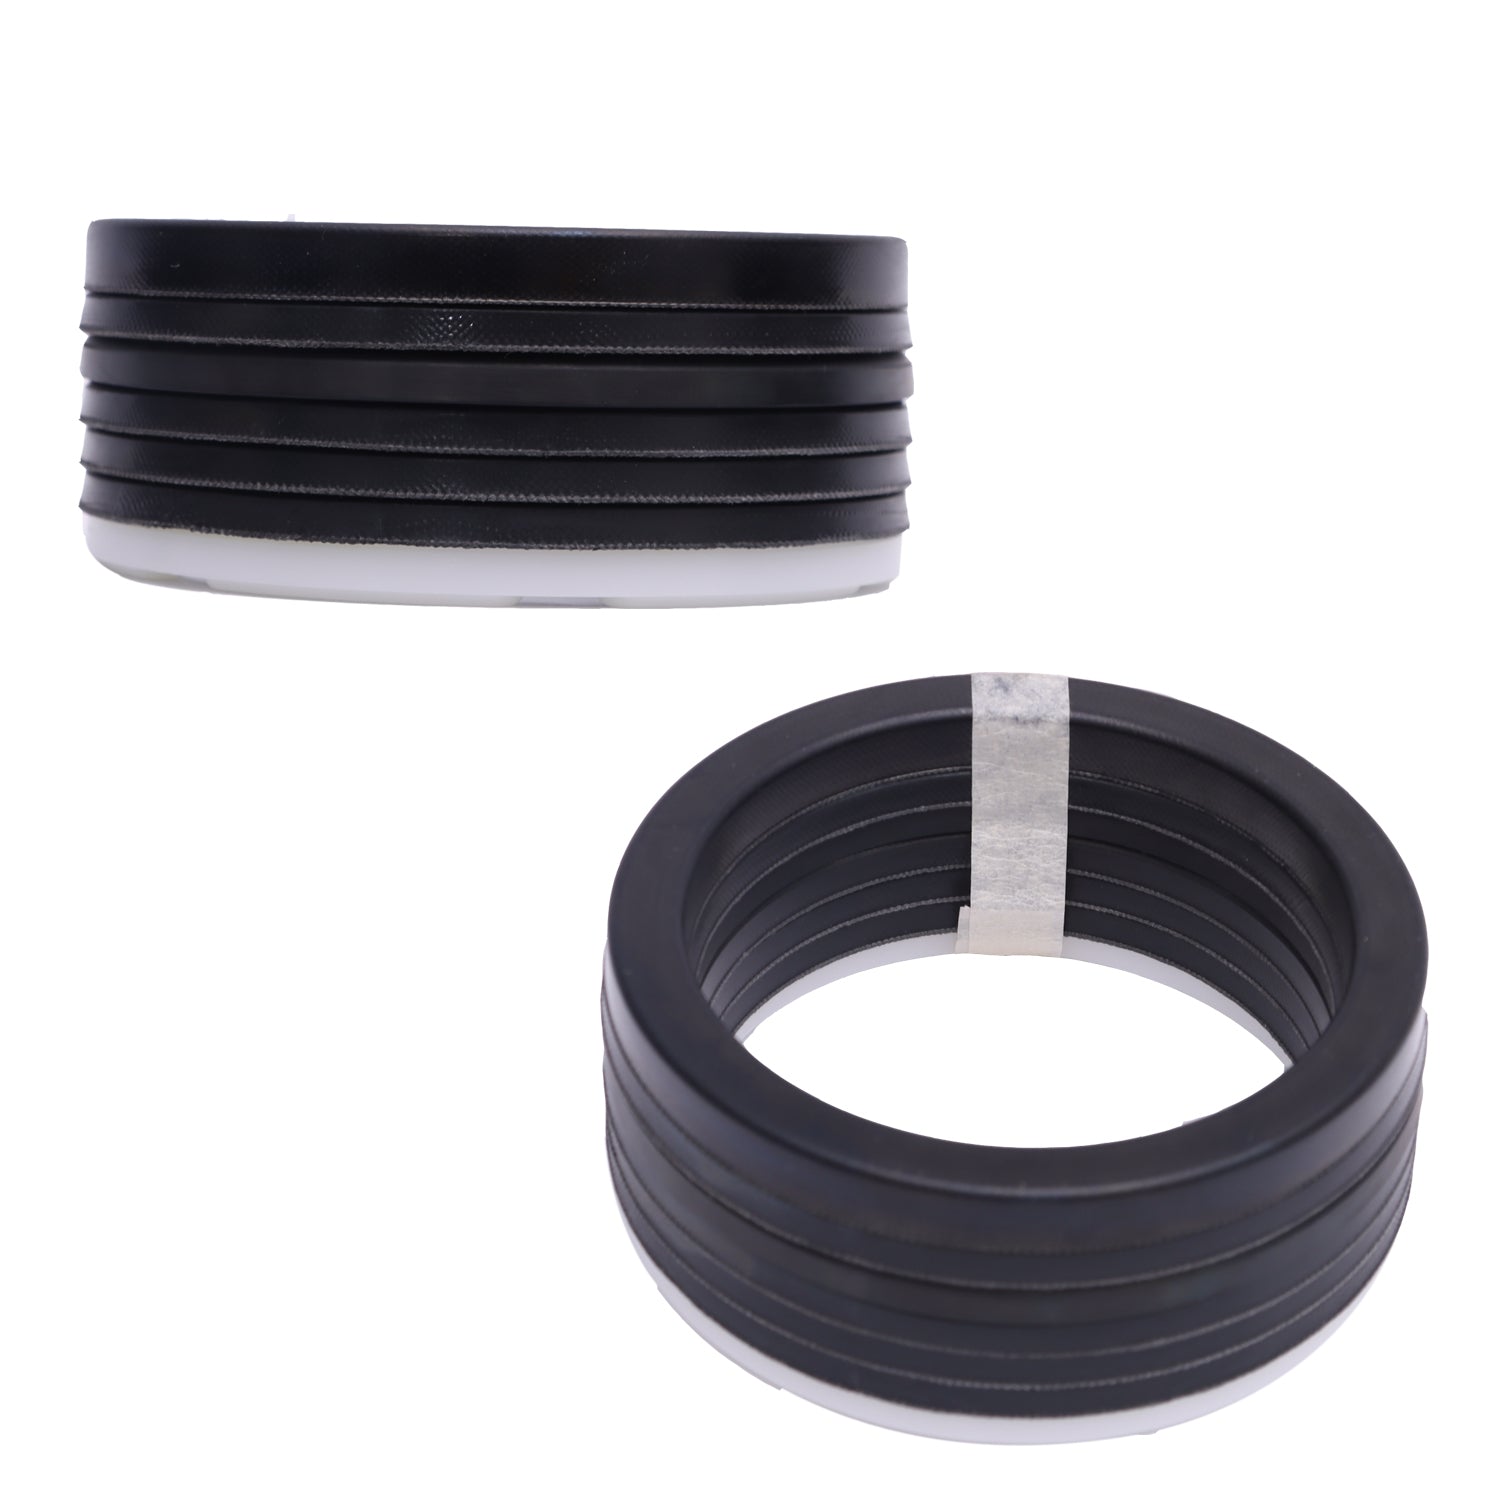 Differential Cylinder 98418221 (DN 90/50) Seal Kit for Schwing Trunk-Mounted Concrete Pump, Hydraulic Main Oil Cylinder Sealing Kit for Schwing Stetter Concrete Pump. - KUDUPARTS